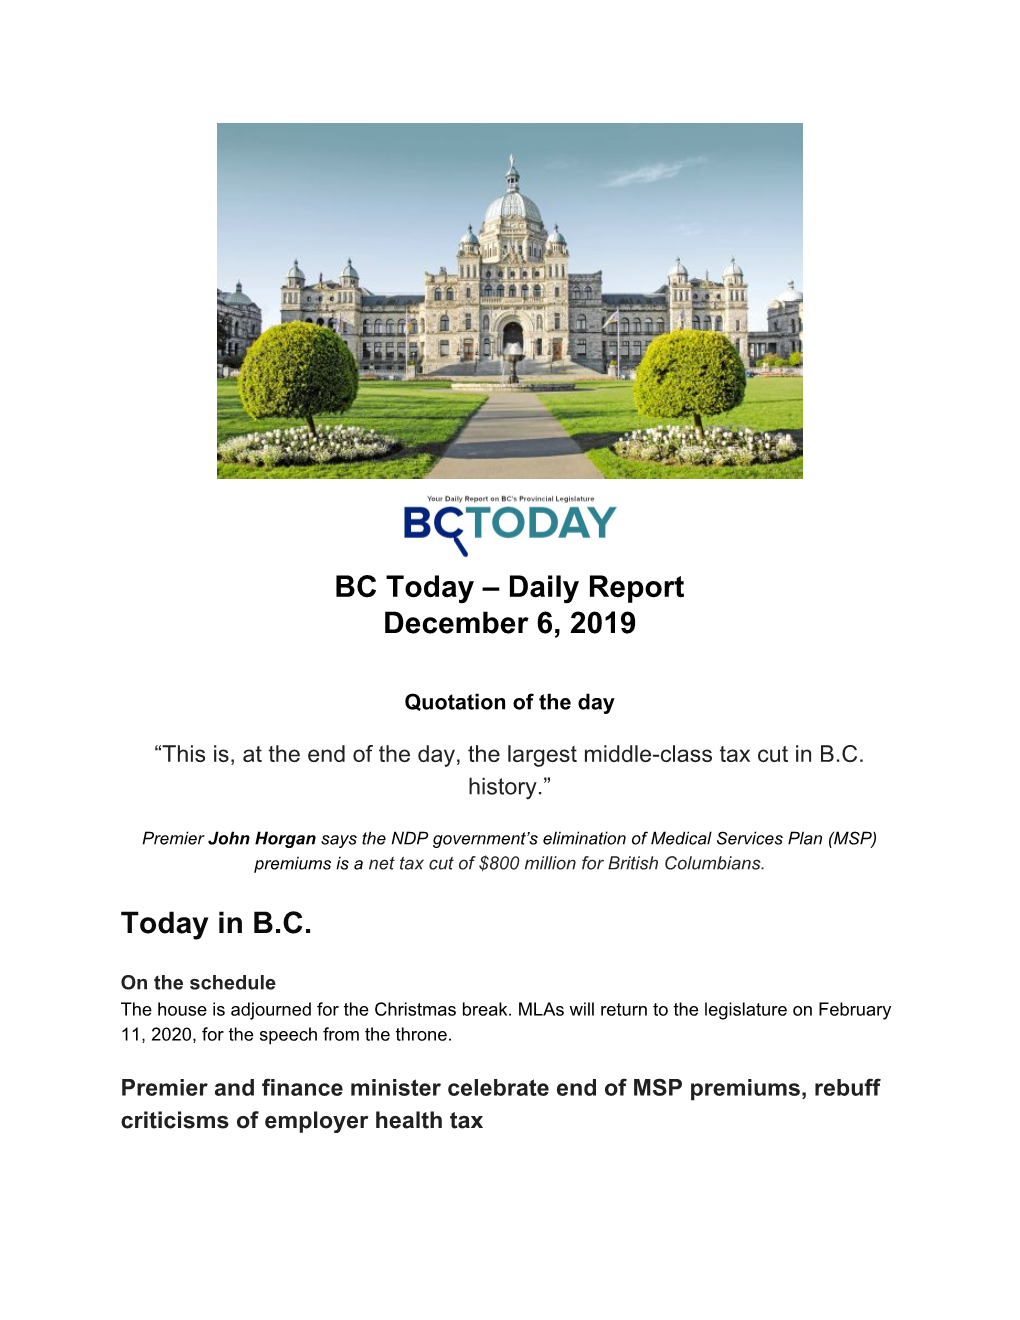 BC Today – Daily Report December 6, 2019 Today in B.C